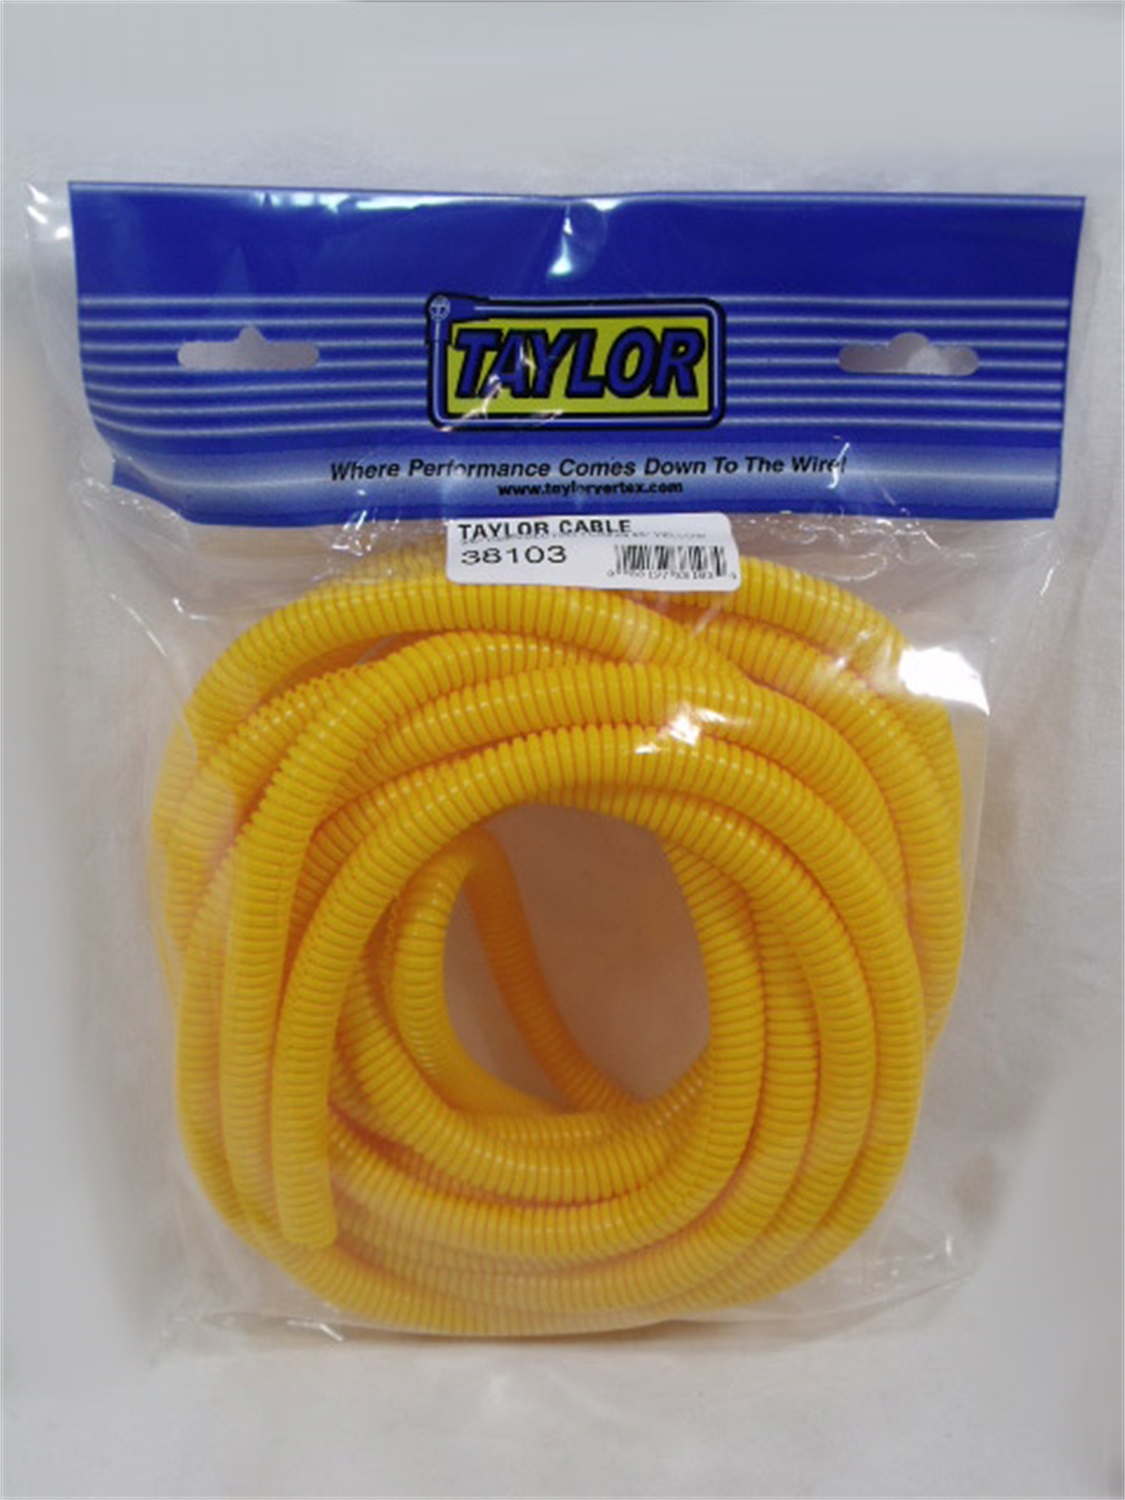 Taylor Cable Taylor Cable 38103 Convoluted Tubing